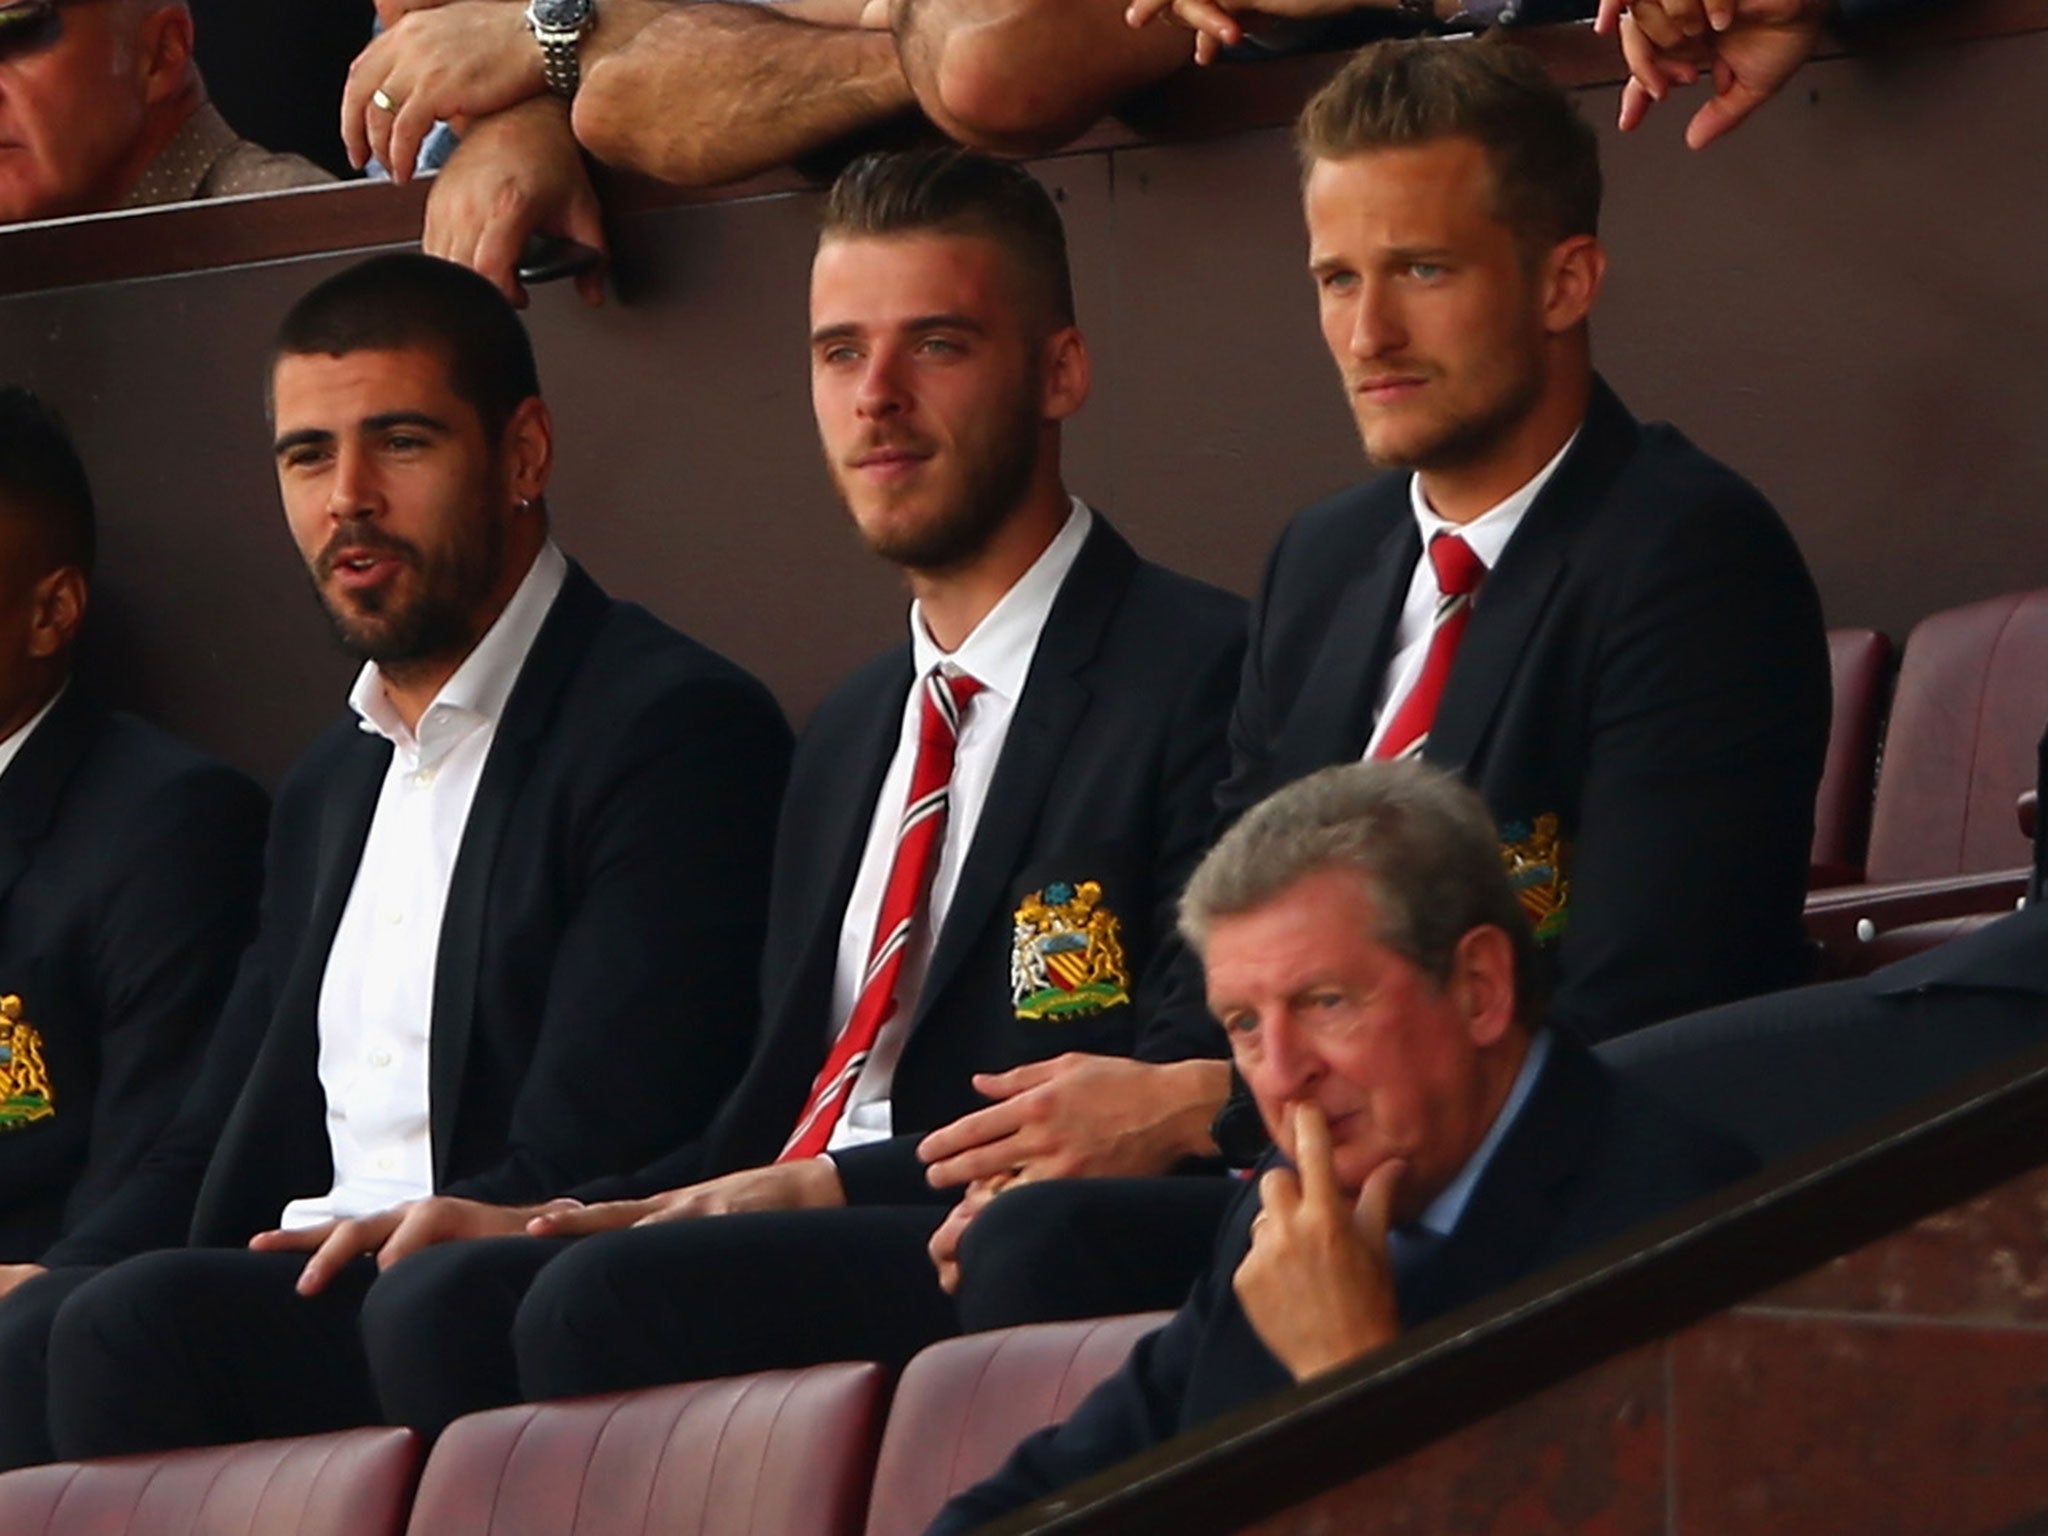 David De Gea, Victor Valdes and Anders Lindegaard watch Manchester United from the stands